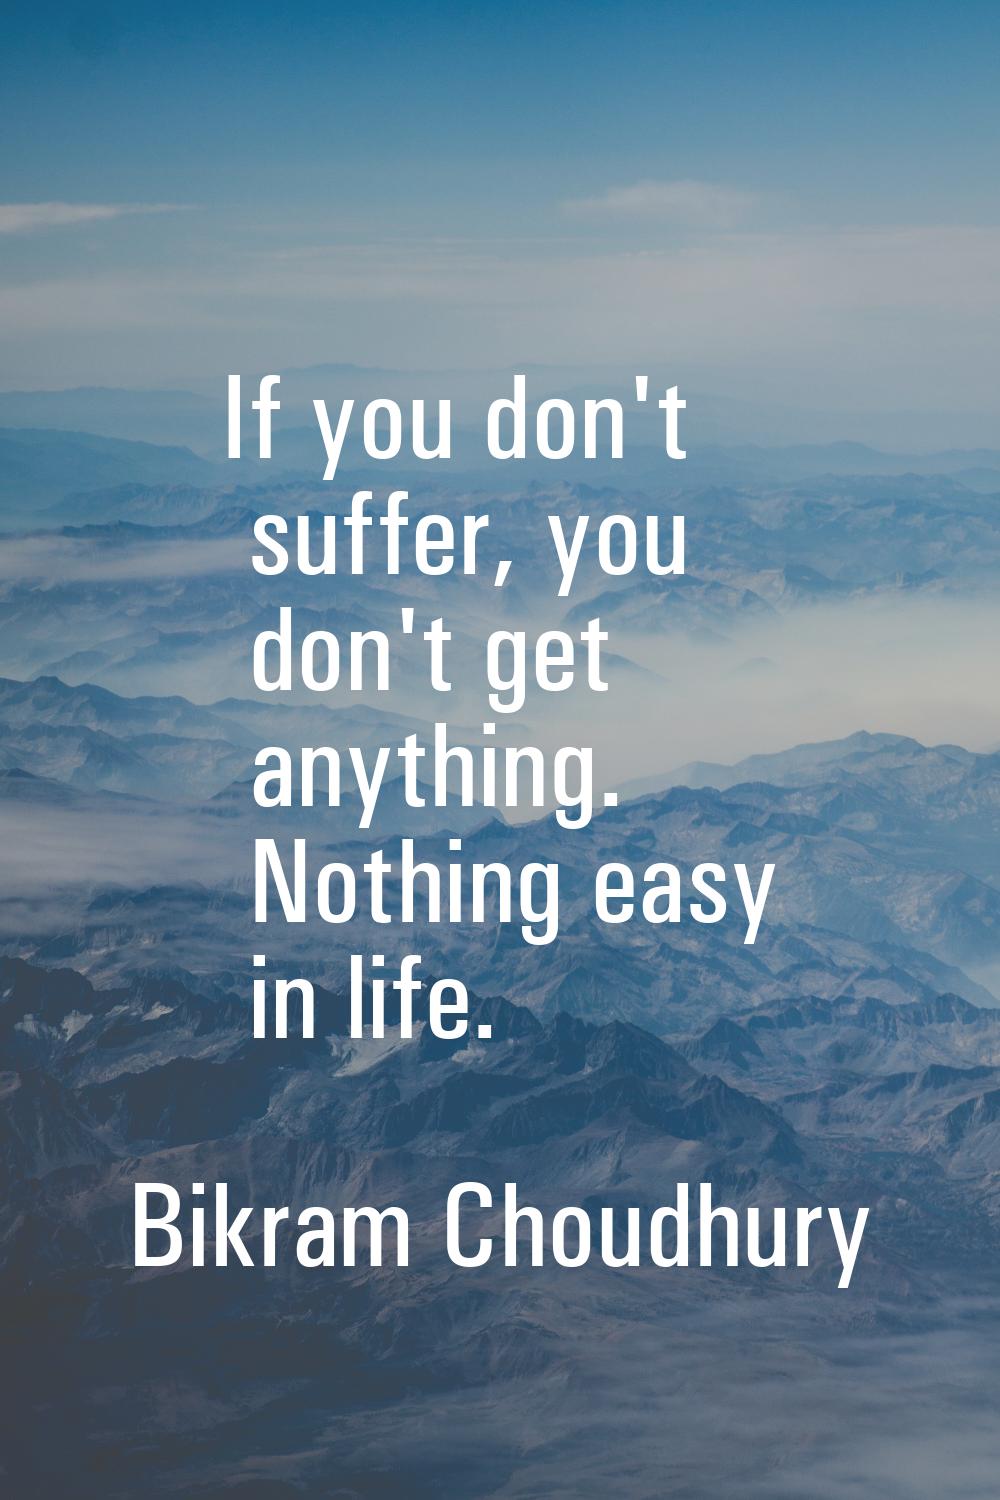 If you don't suffer, you don't get anything. Nothing easy in life.